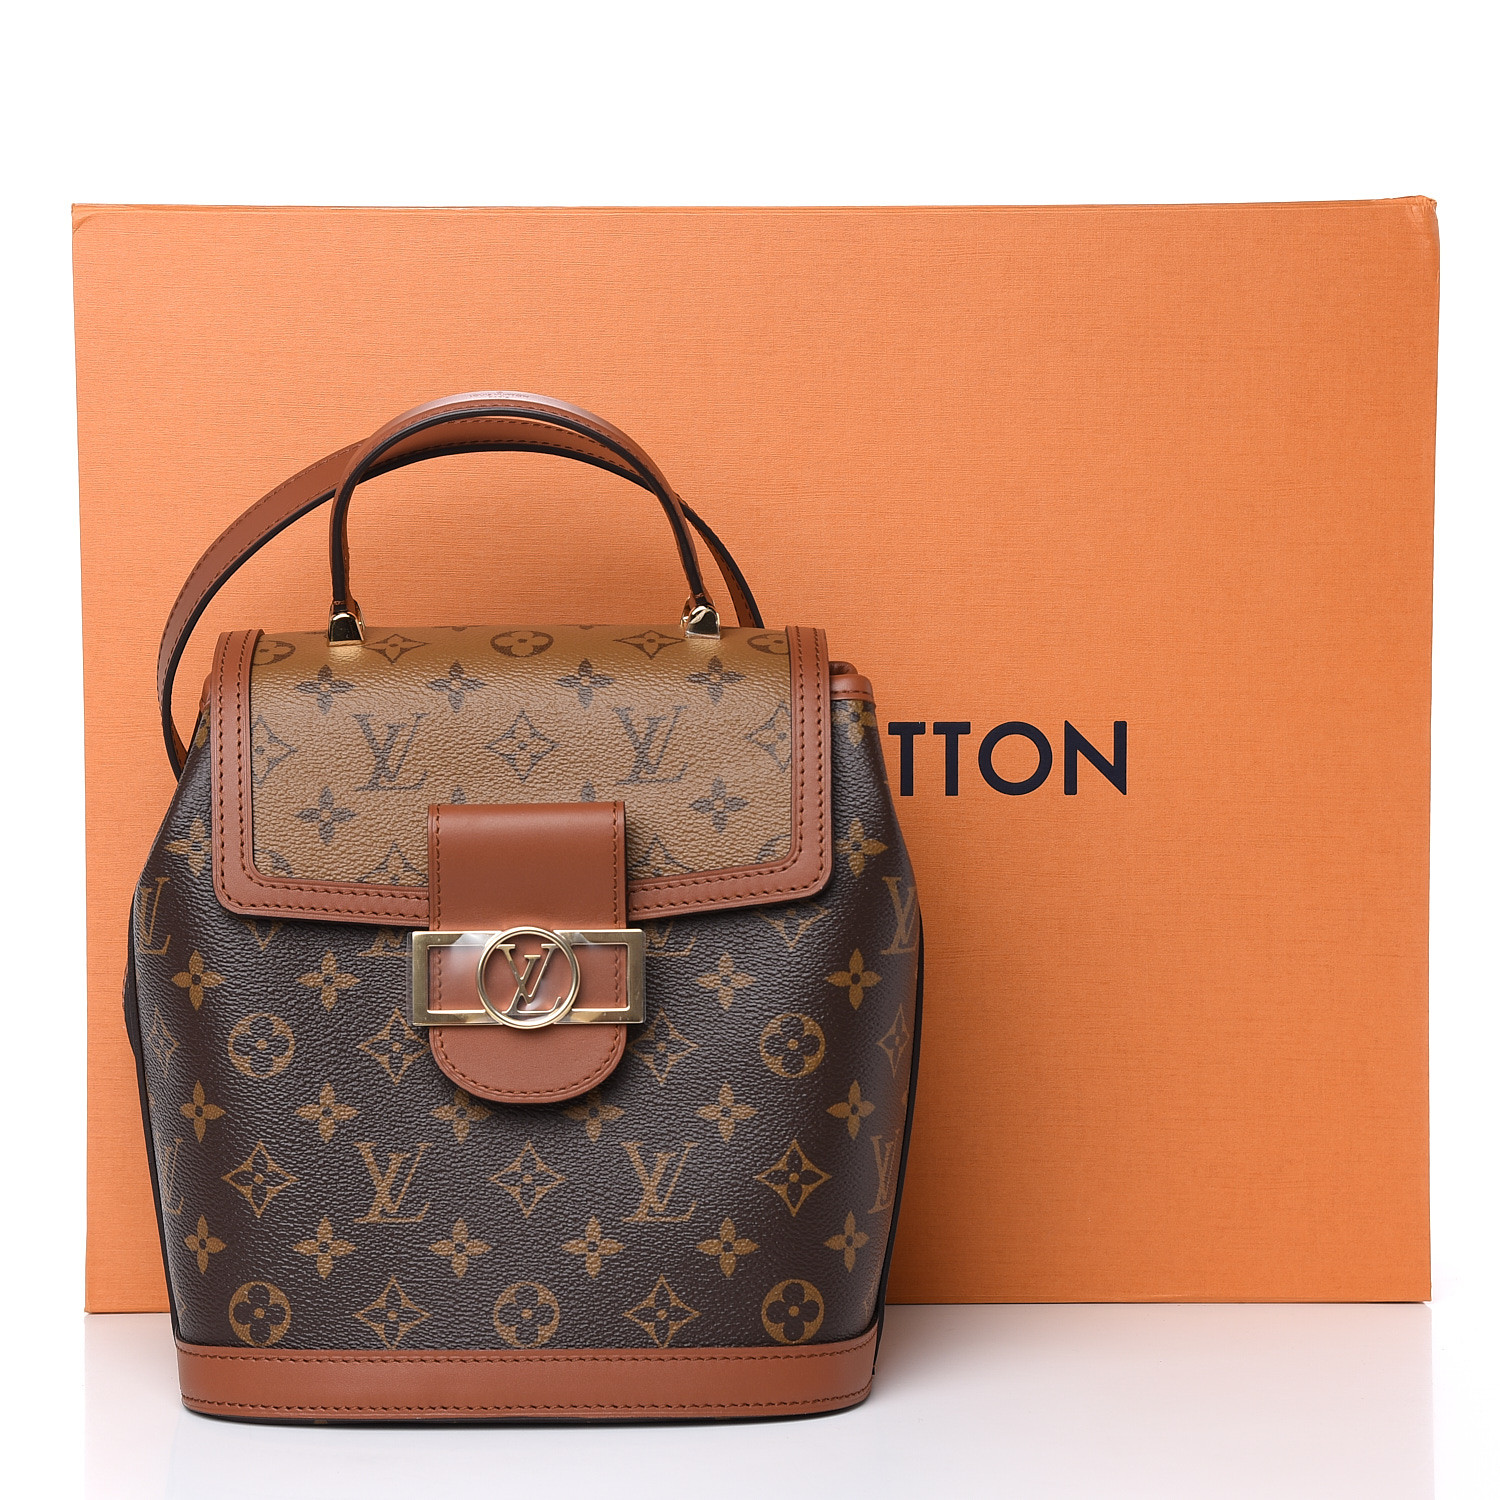 Louis Vuitton DAUPHINE BACKPACK PM